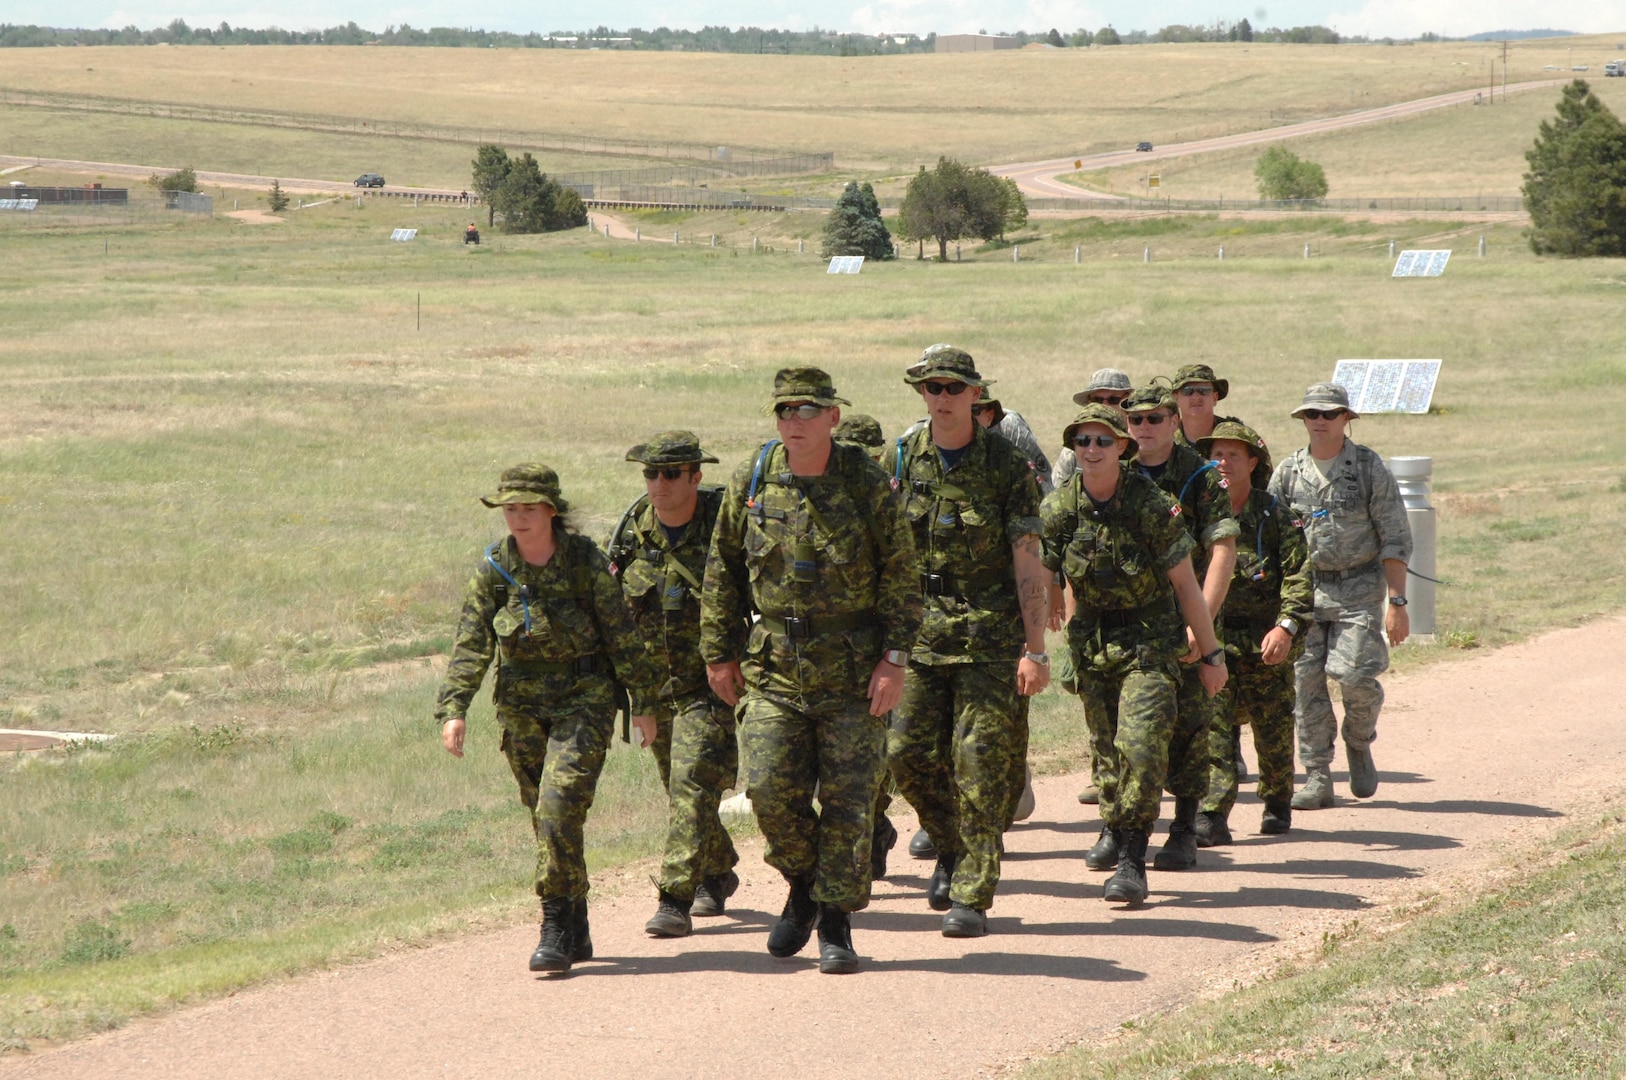 PETERSON AIR FORCE BASE, Colo. - The NORAD Nijmegen 2010 team marches on Peterson Air Force Base June 7 for their certification to participate in this year's Nijmegen March in The Netherlands in July. The NORAD team is comprised of 11 members, eight Canadian Forces and three U.S. forces, who will march in uniform with 22-pound rucksacks. The Nijmegen March begins July 20 in Nijmegen, The Netherlands. 

(U.S. Air Force photo by Staff Sgt. Thomas J. Doscher) 

